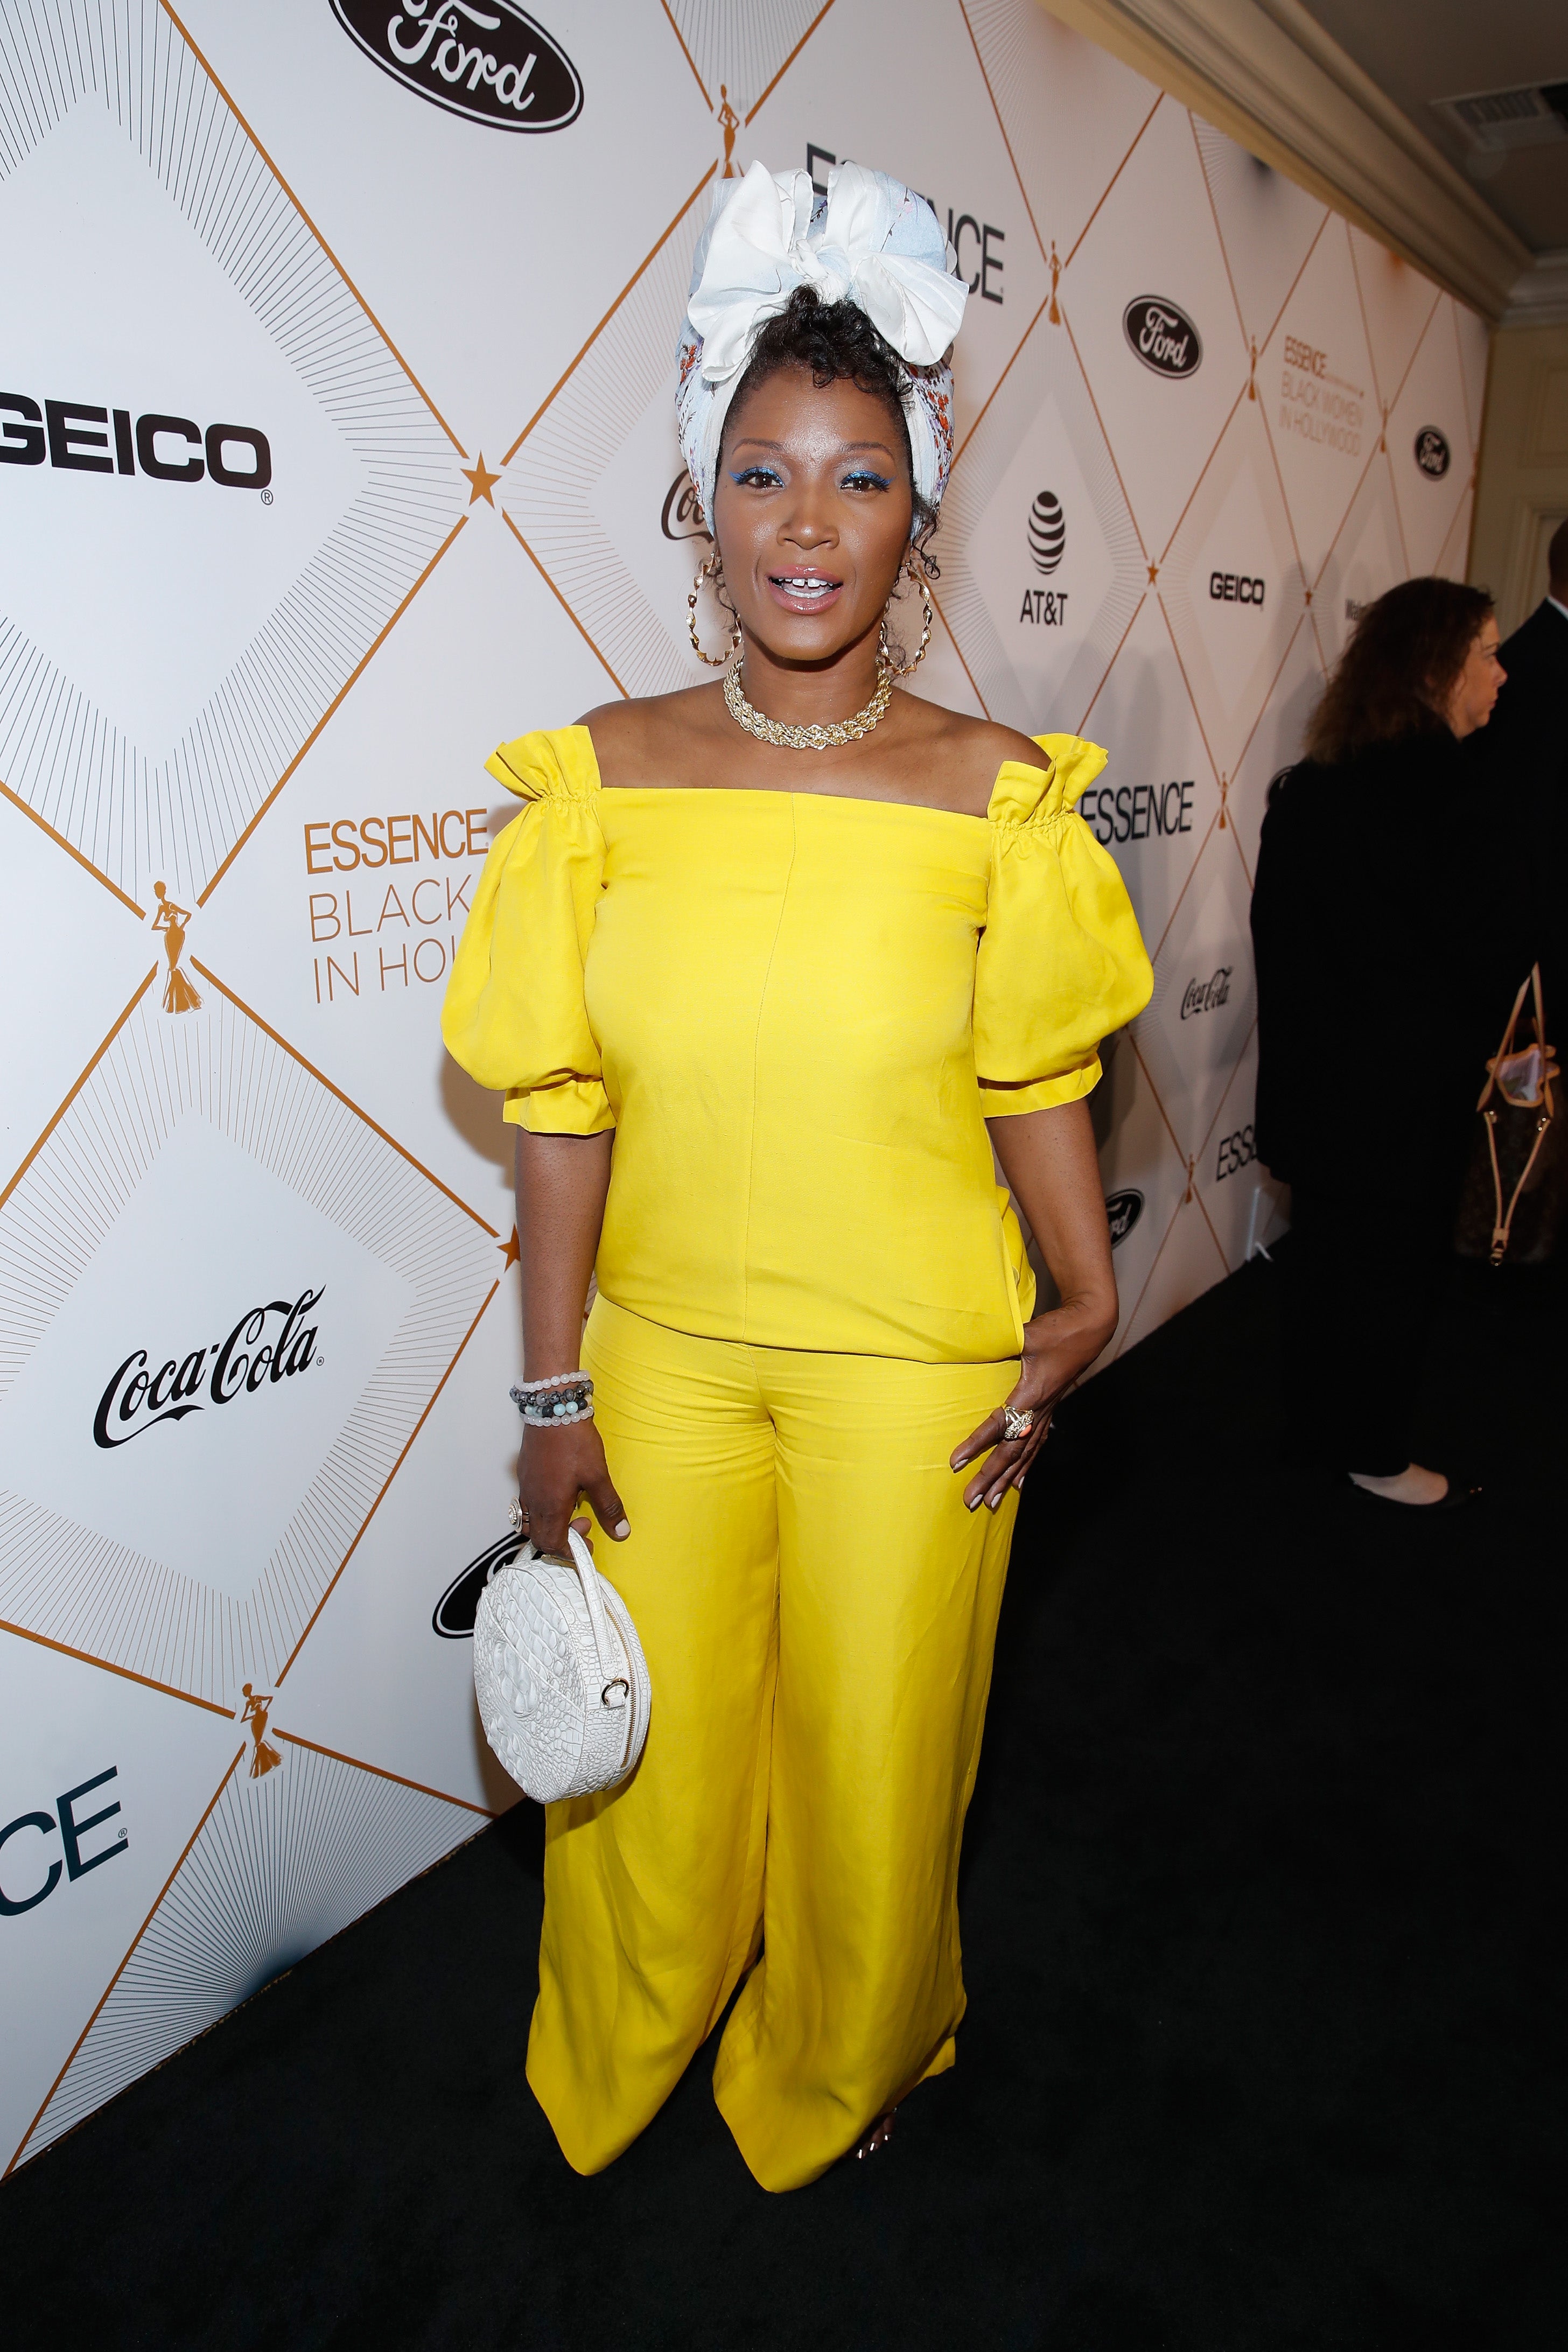 Stars Shined Bright On The ESSENCE Black Women In Hollywood Red Carpet
